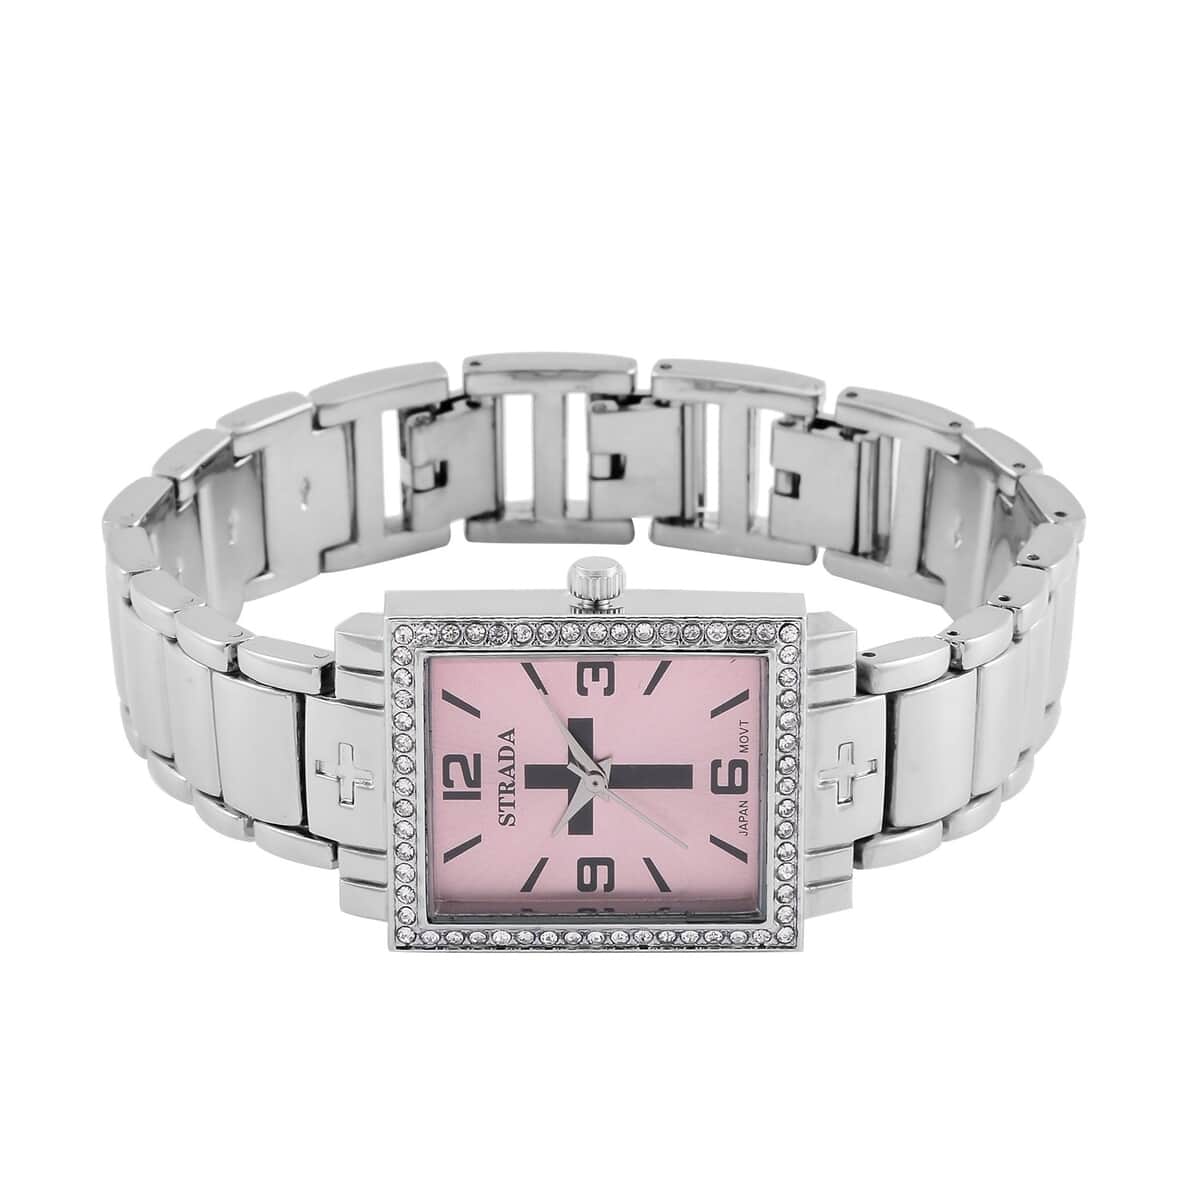 Strada White Austrian Crystal Japanese Movement Cross Pattern & Pink Dial Watch with Silvertone Strap (26.16-30.48 mm) (6.75-8.25 Inches) image number 4